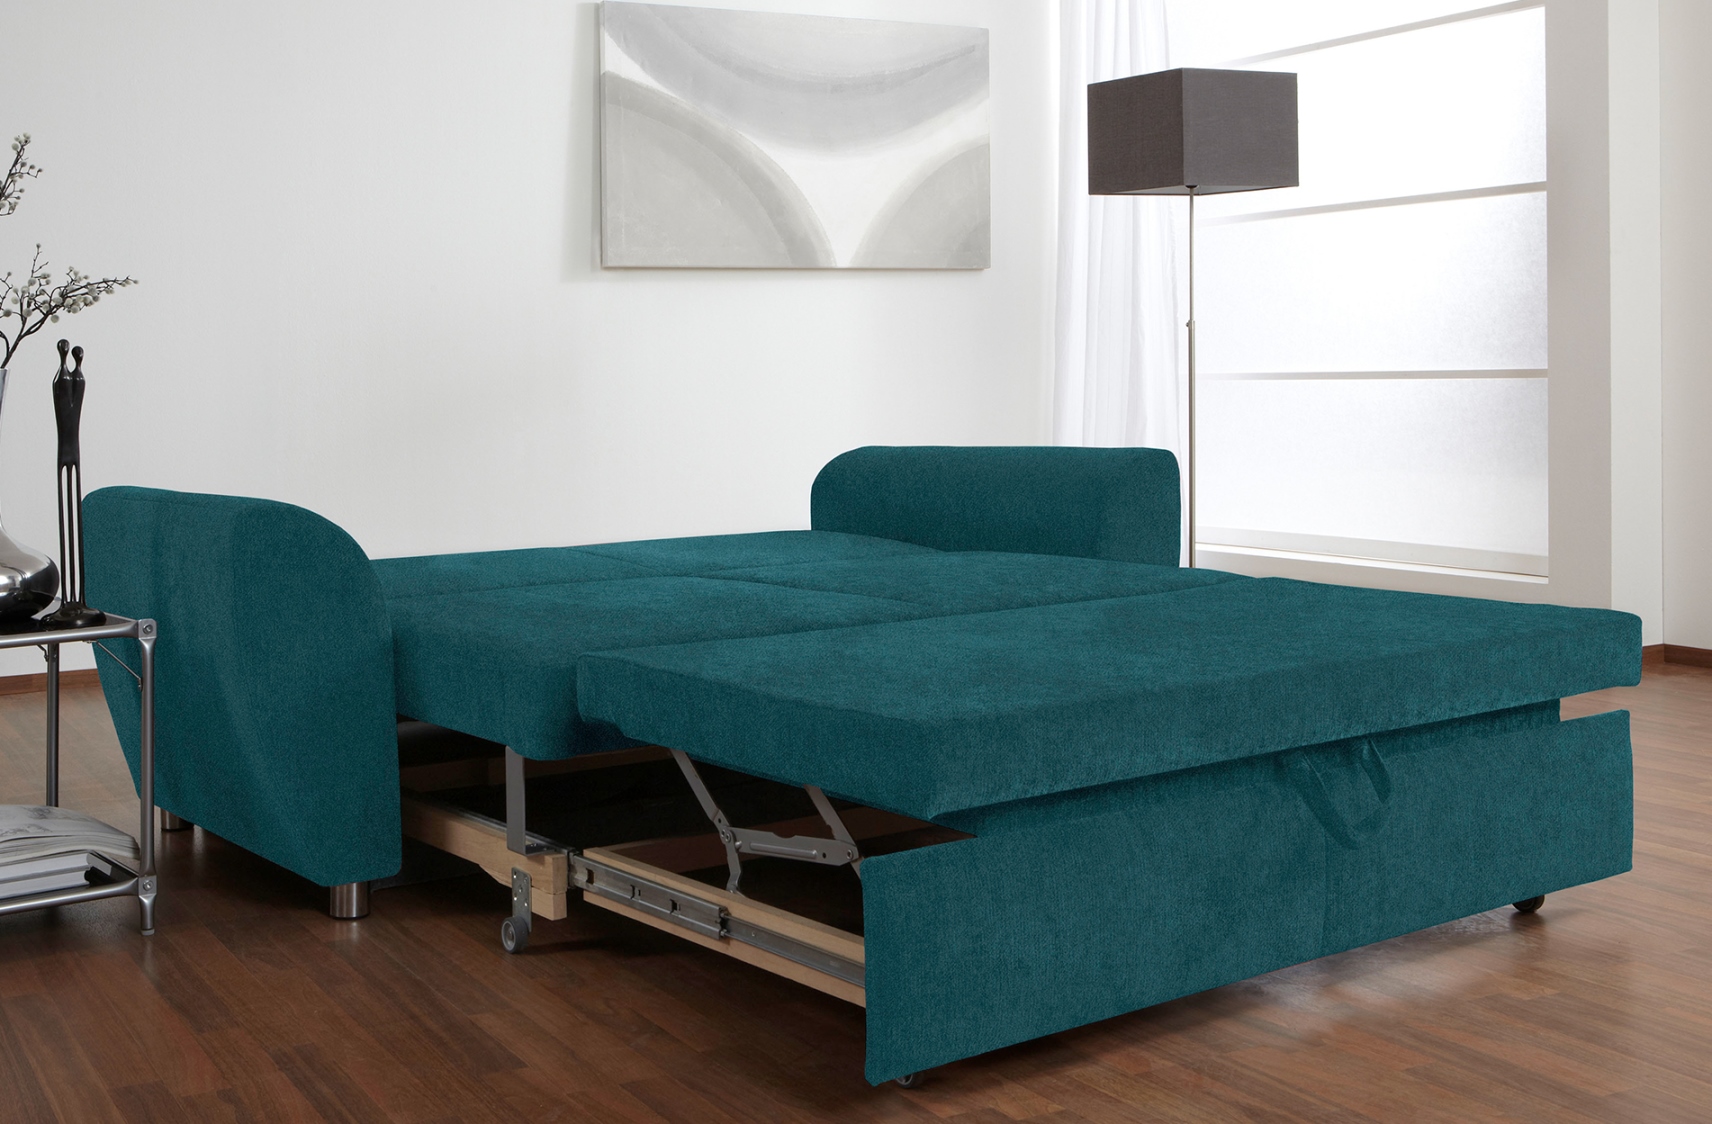 Essen Sleeper Sofa The Best Pull Out